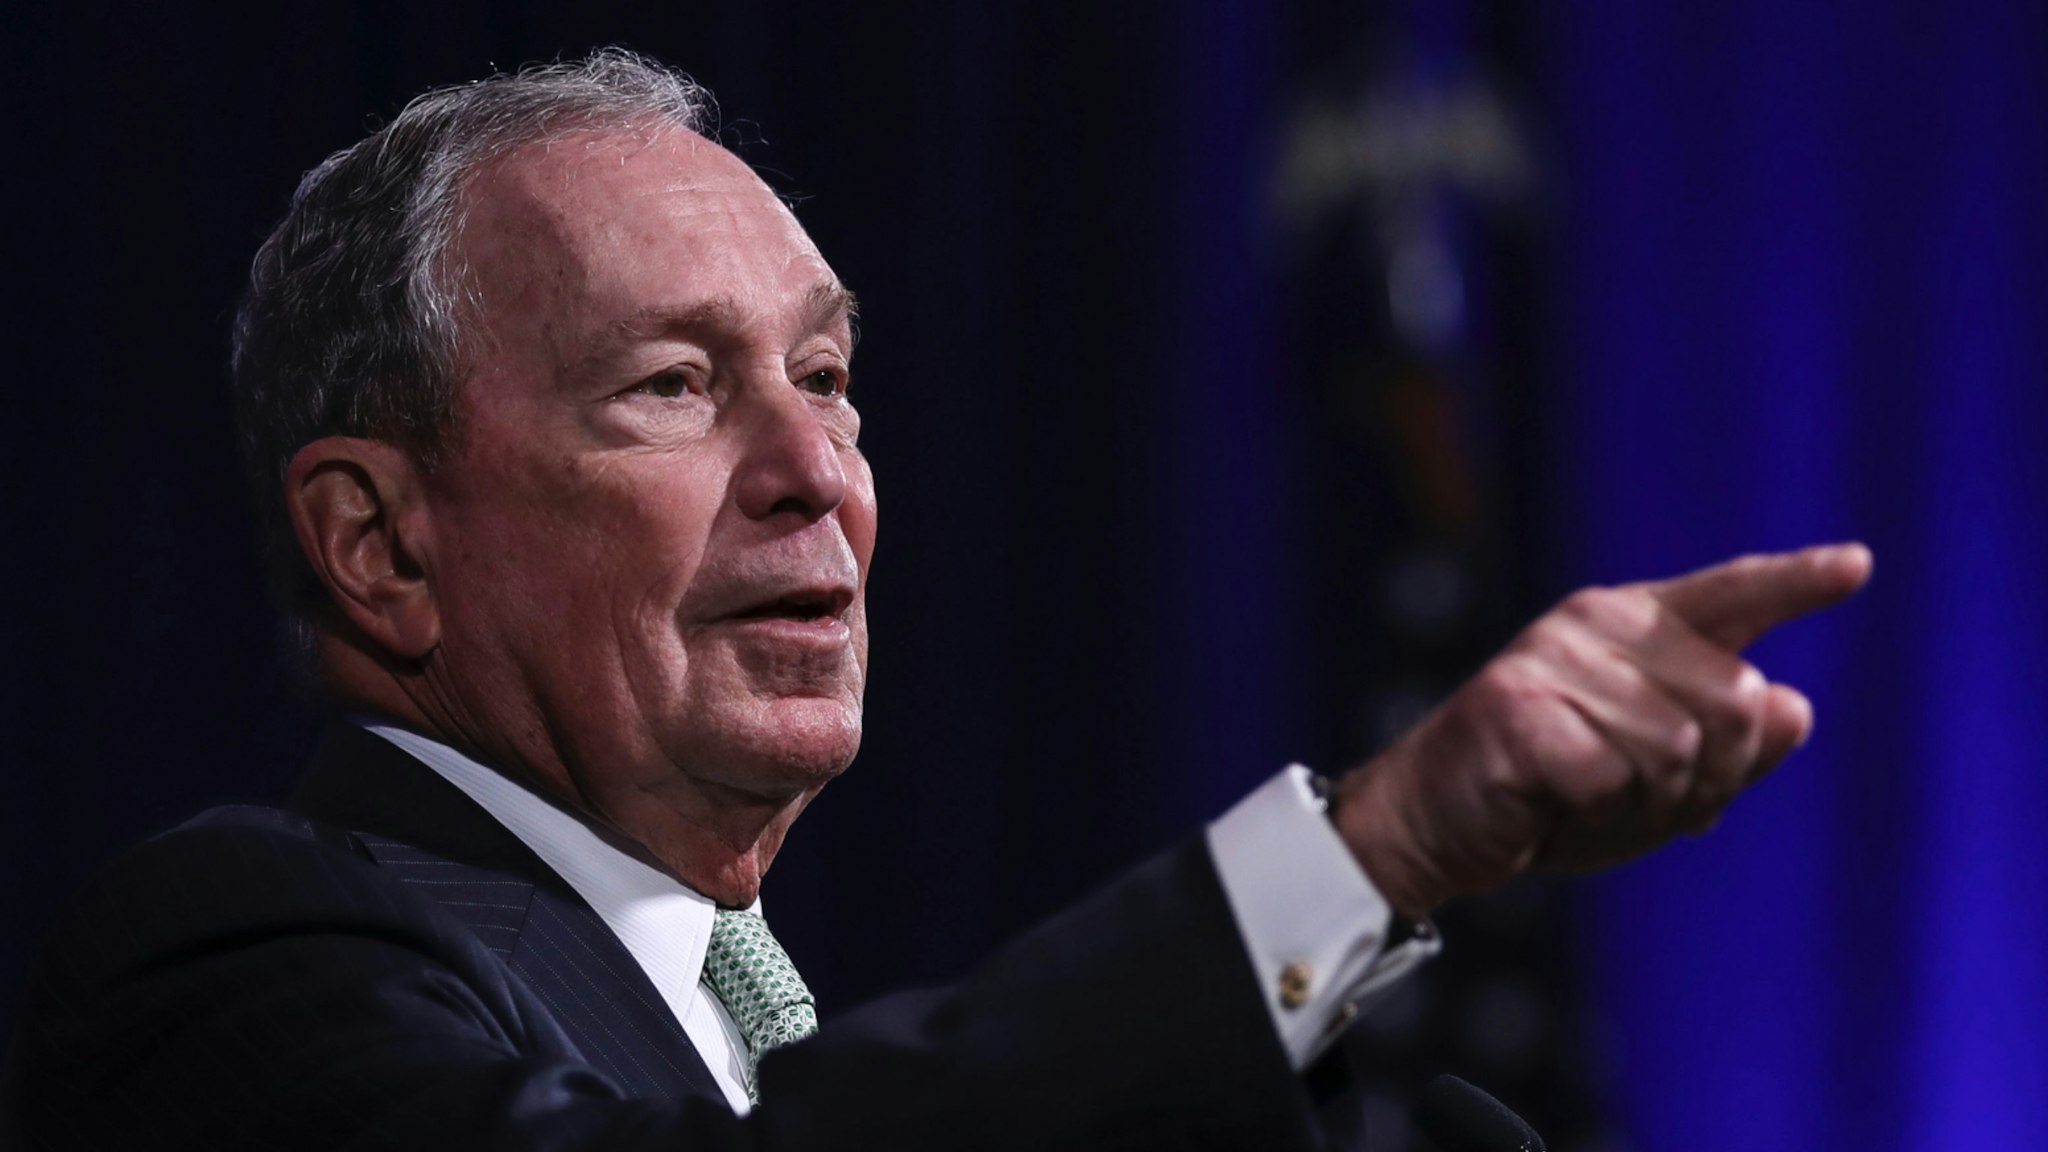 Newly announced Democratic presidential candidate, former New York Mayor Michael Bloomberg speaks during a press conference to discuss his presidential run on November 25, 2019 in Norfolk, Virginia.